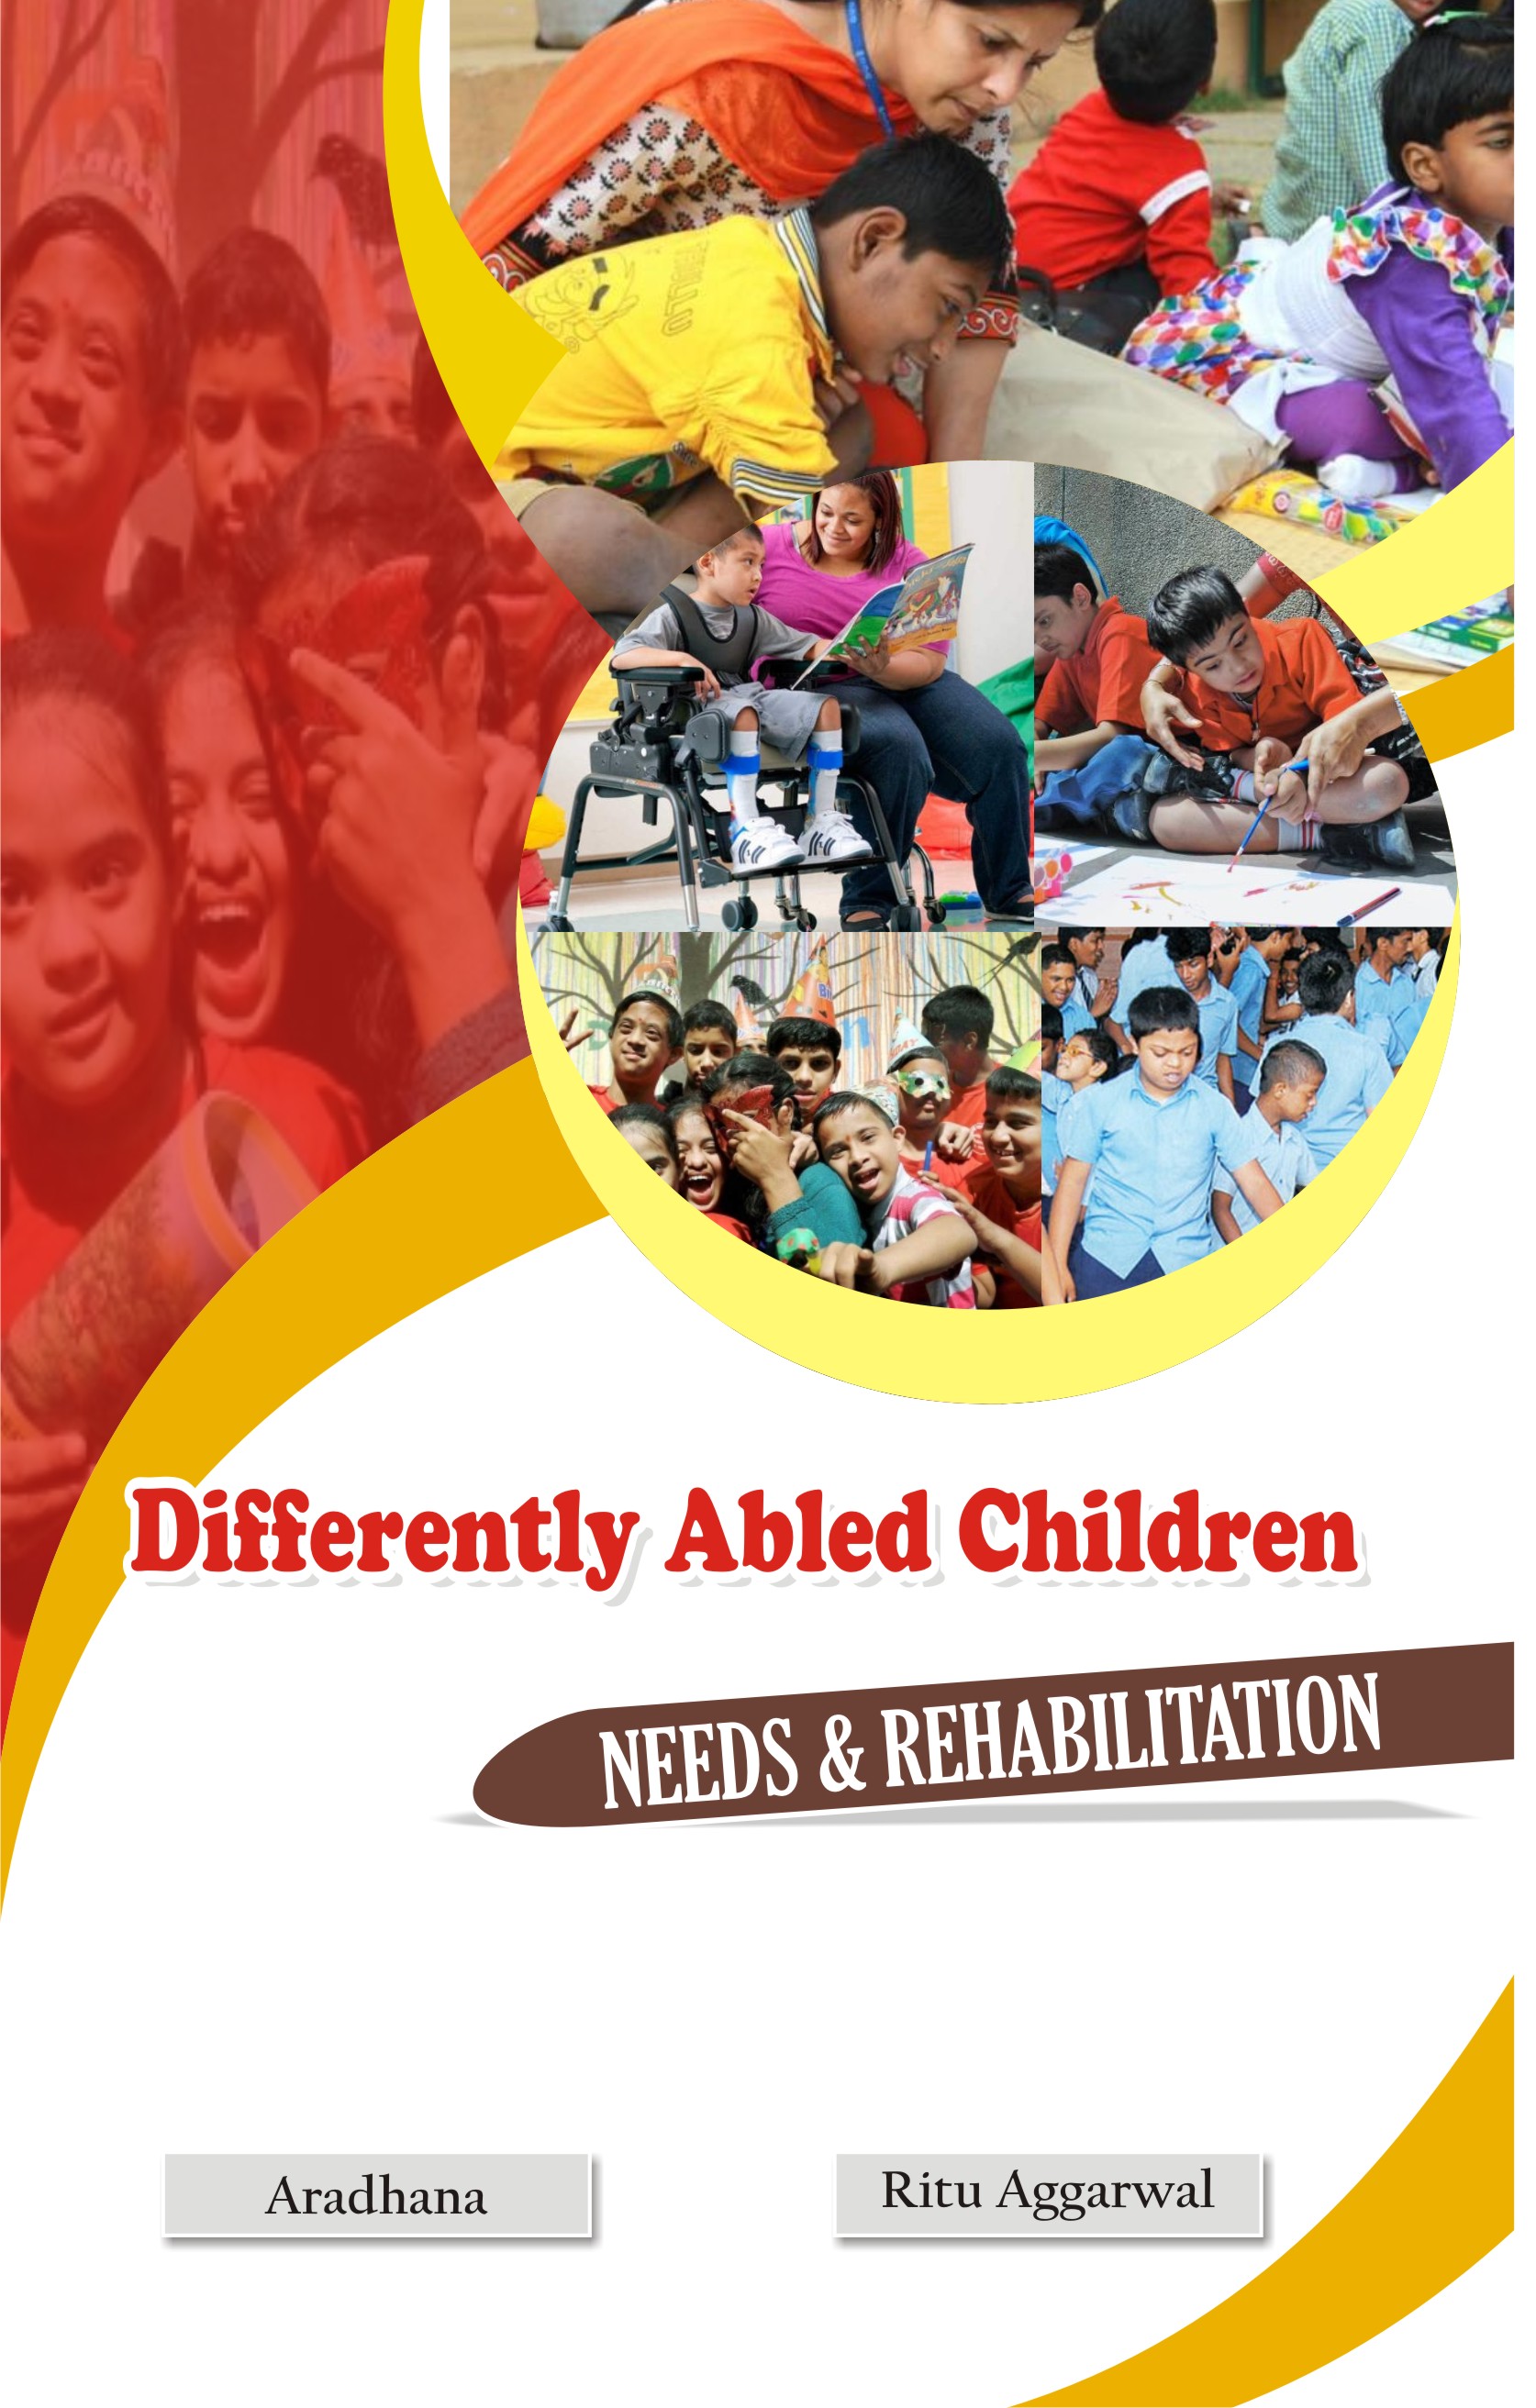 DIFFERENTLY-ABLED-CHILDREN-NEEDS-REHABILITATION-